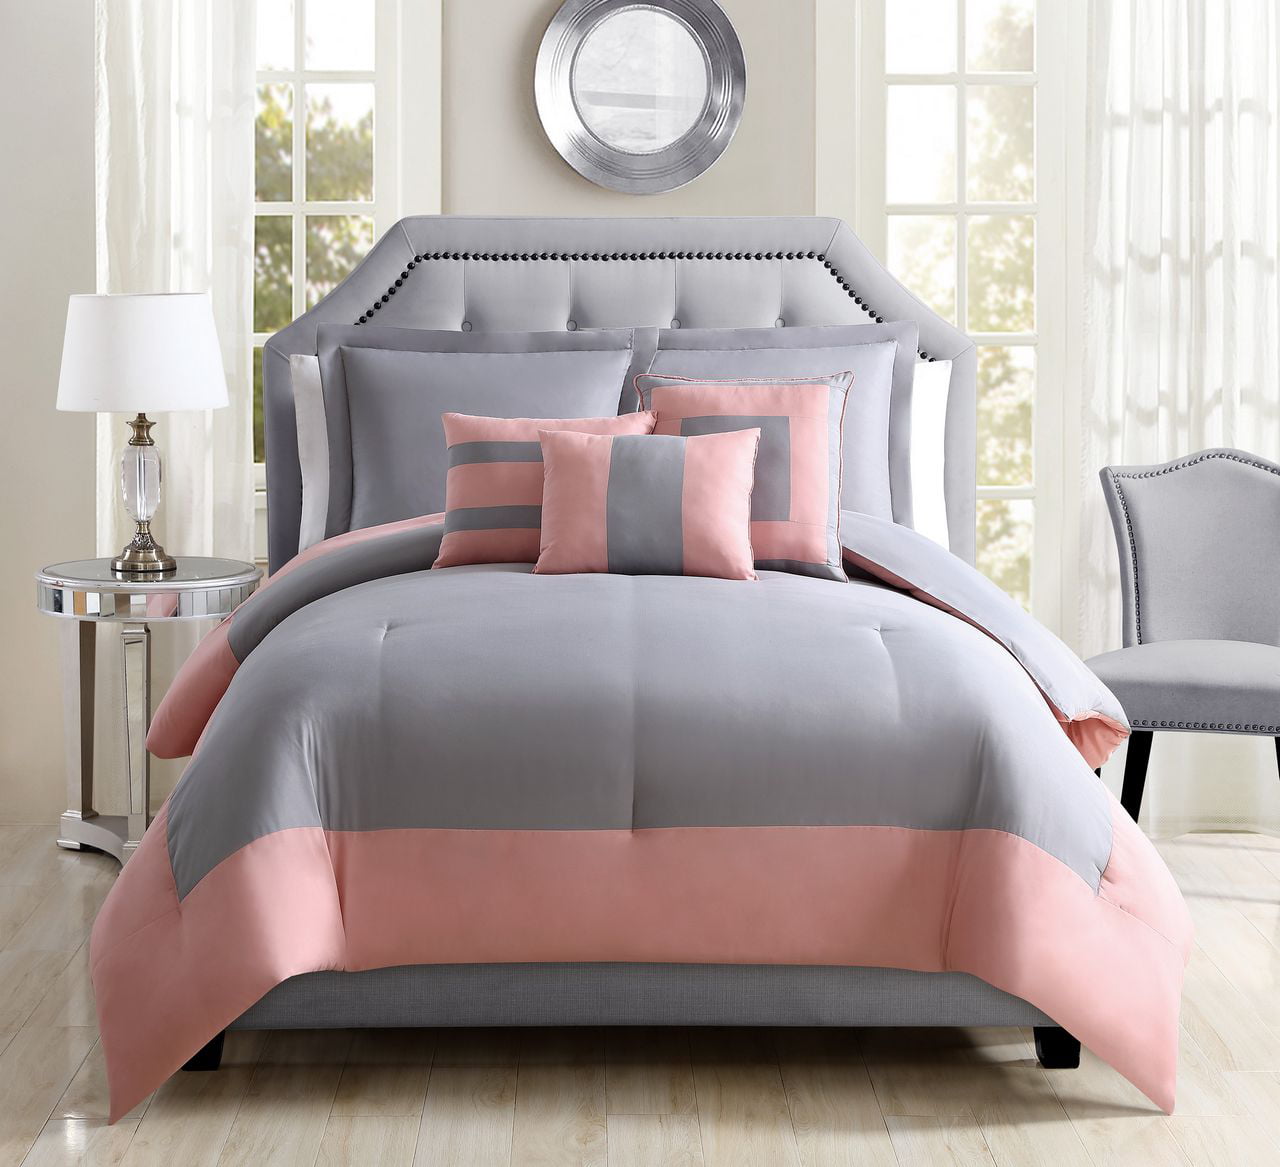 coral and gray bedroom decoration